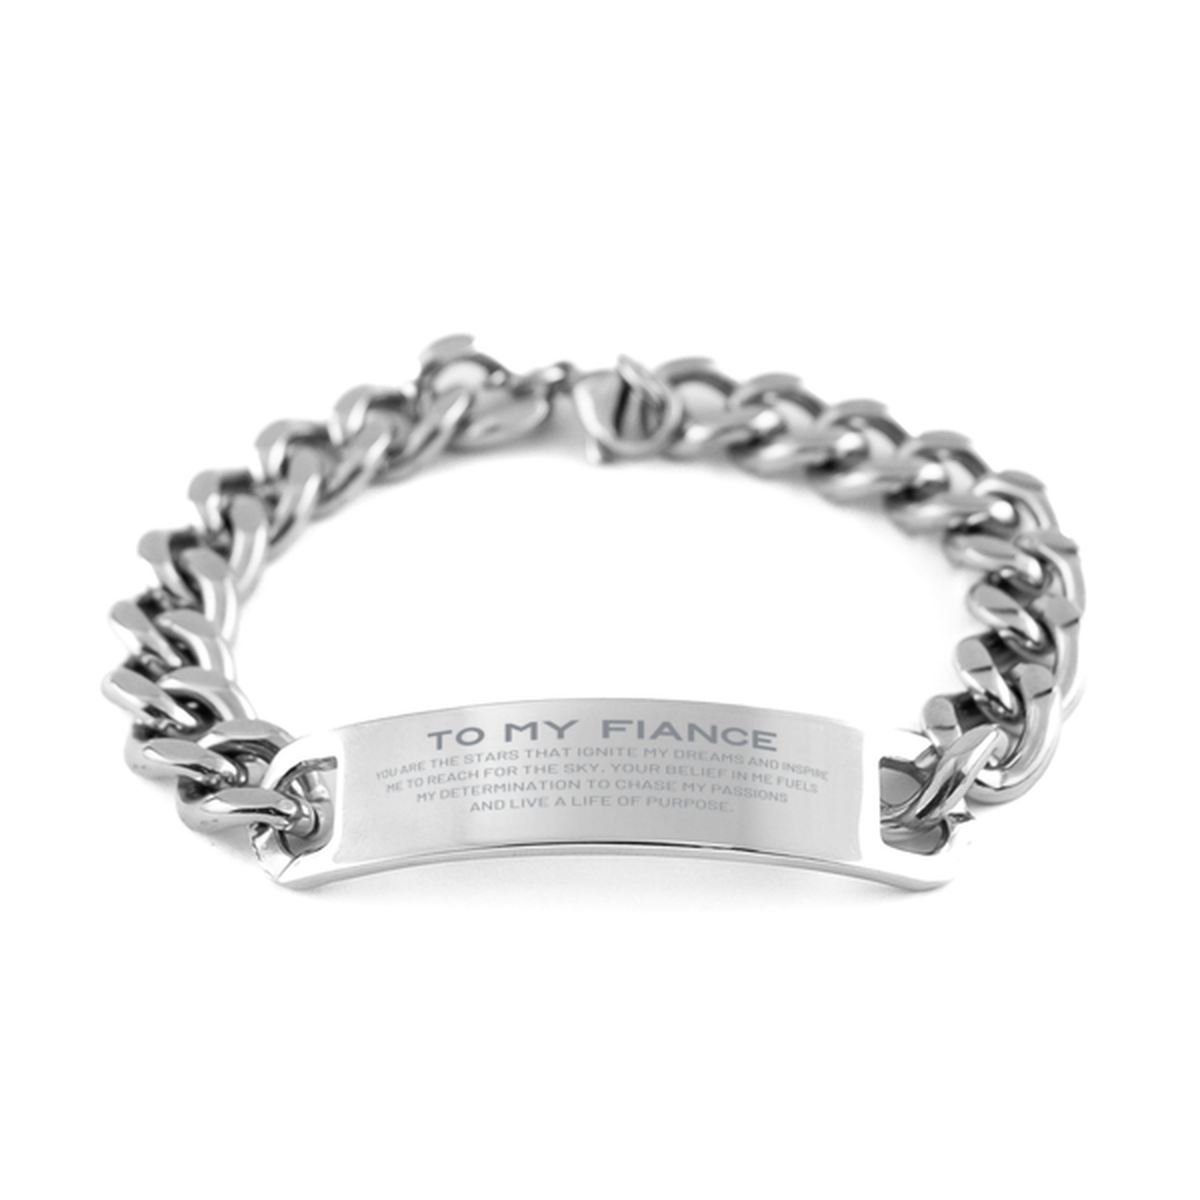 To My Fiance Cuban Chain Stainless Steel Bracelet, You are the stars that ignite my dreams and inspire me to reach for the sky, Birthday Unique Gifts For Fiance, Thank You Gifts For Fiance